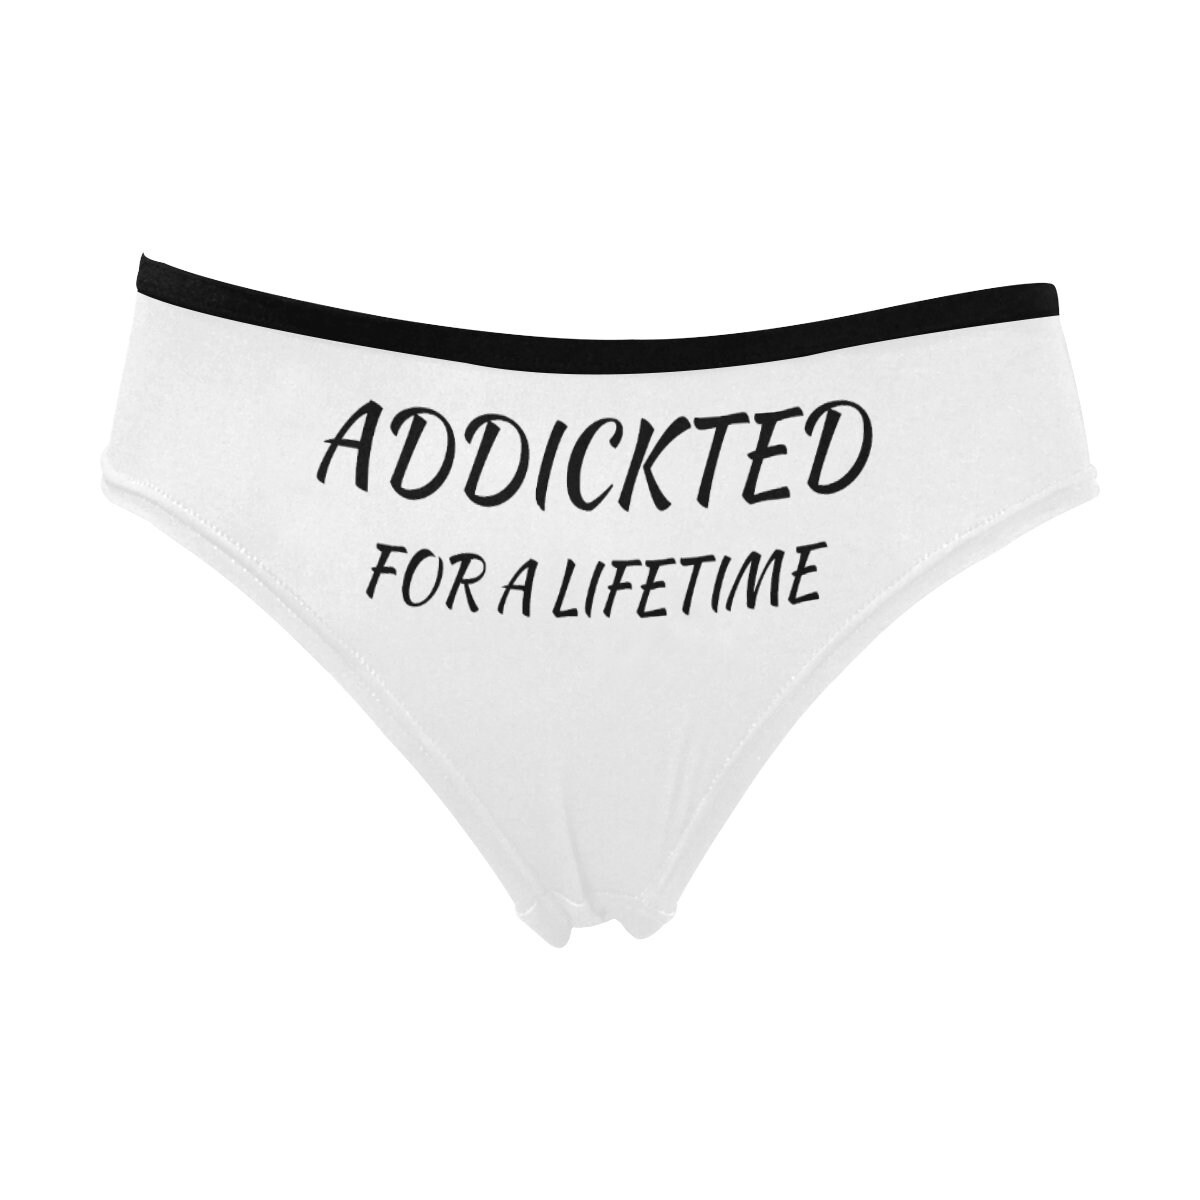 Stretch Me to Feel Good,womens Sexy Panties,personalized Womens